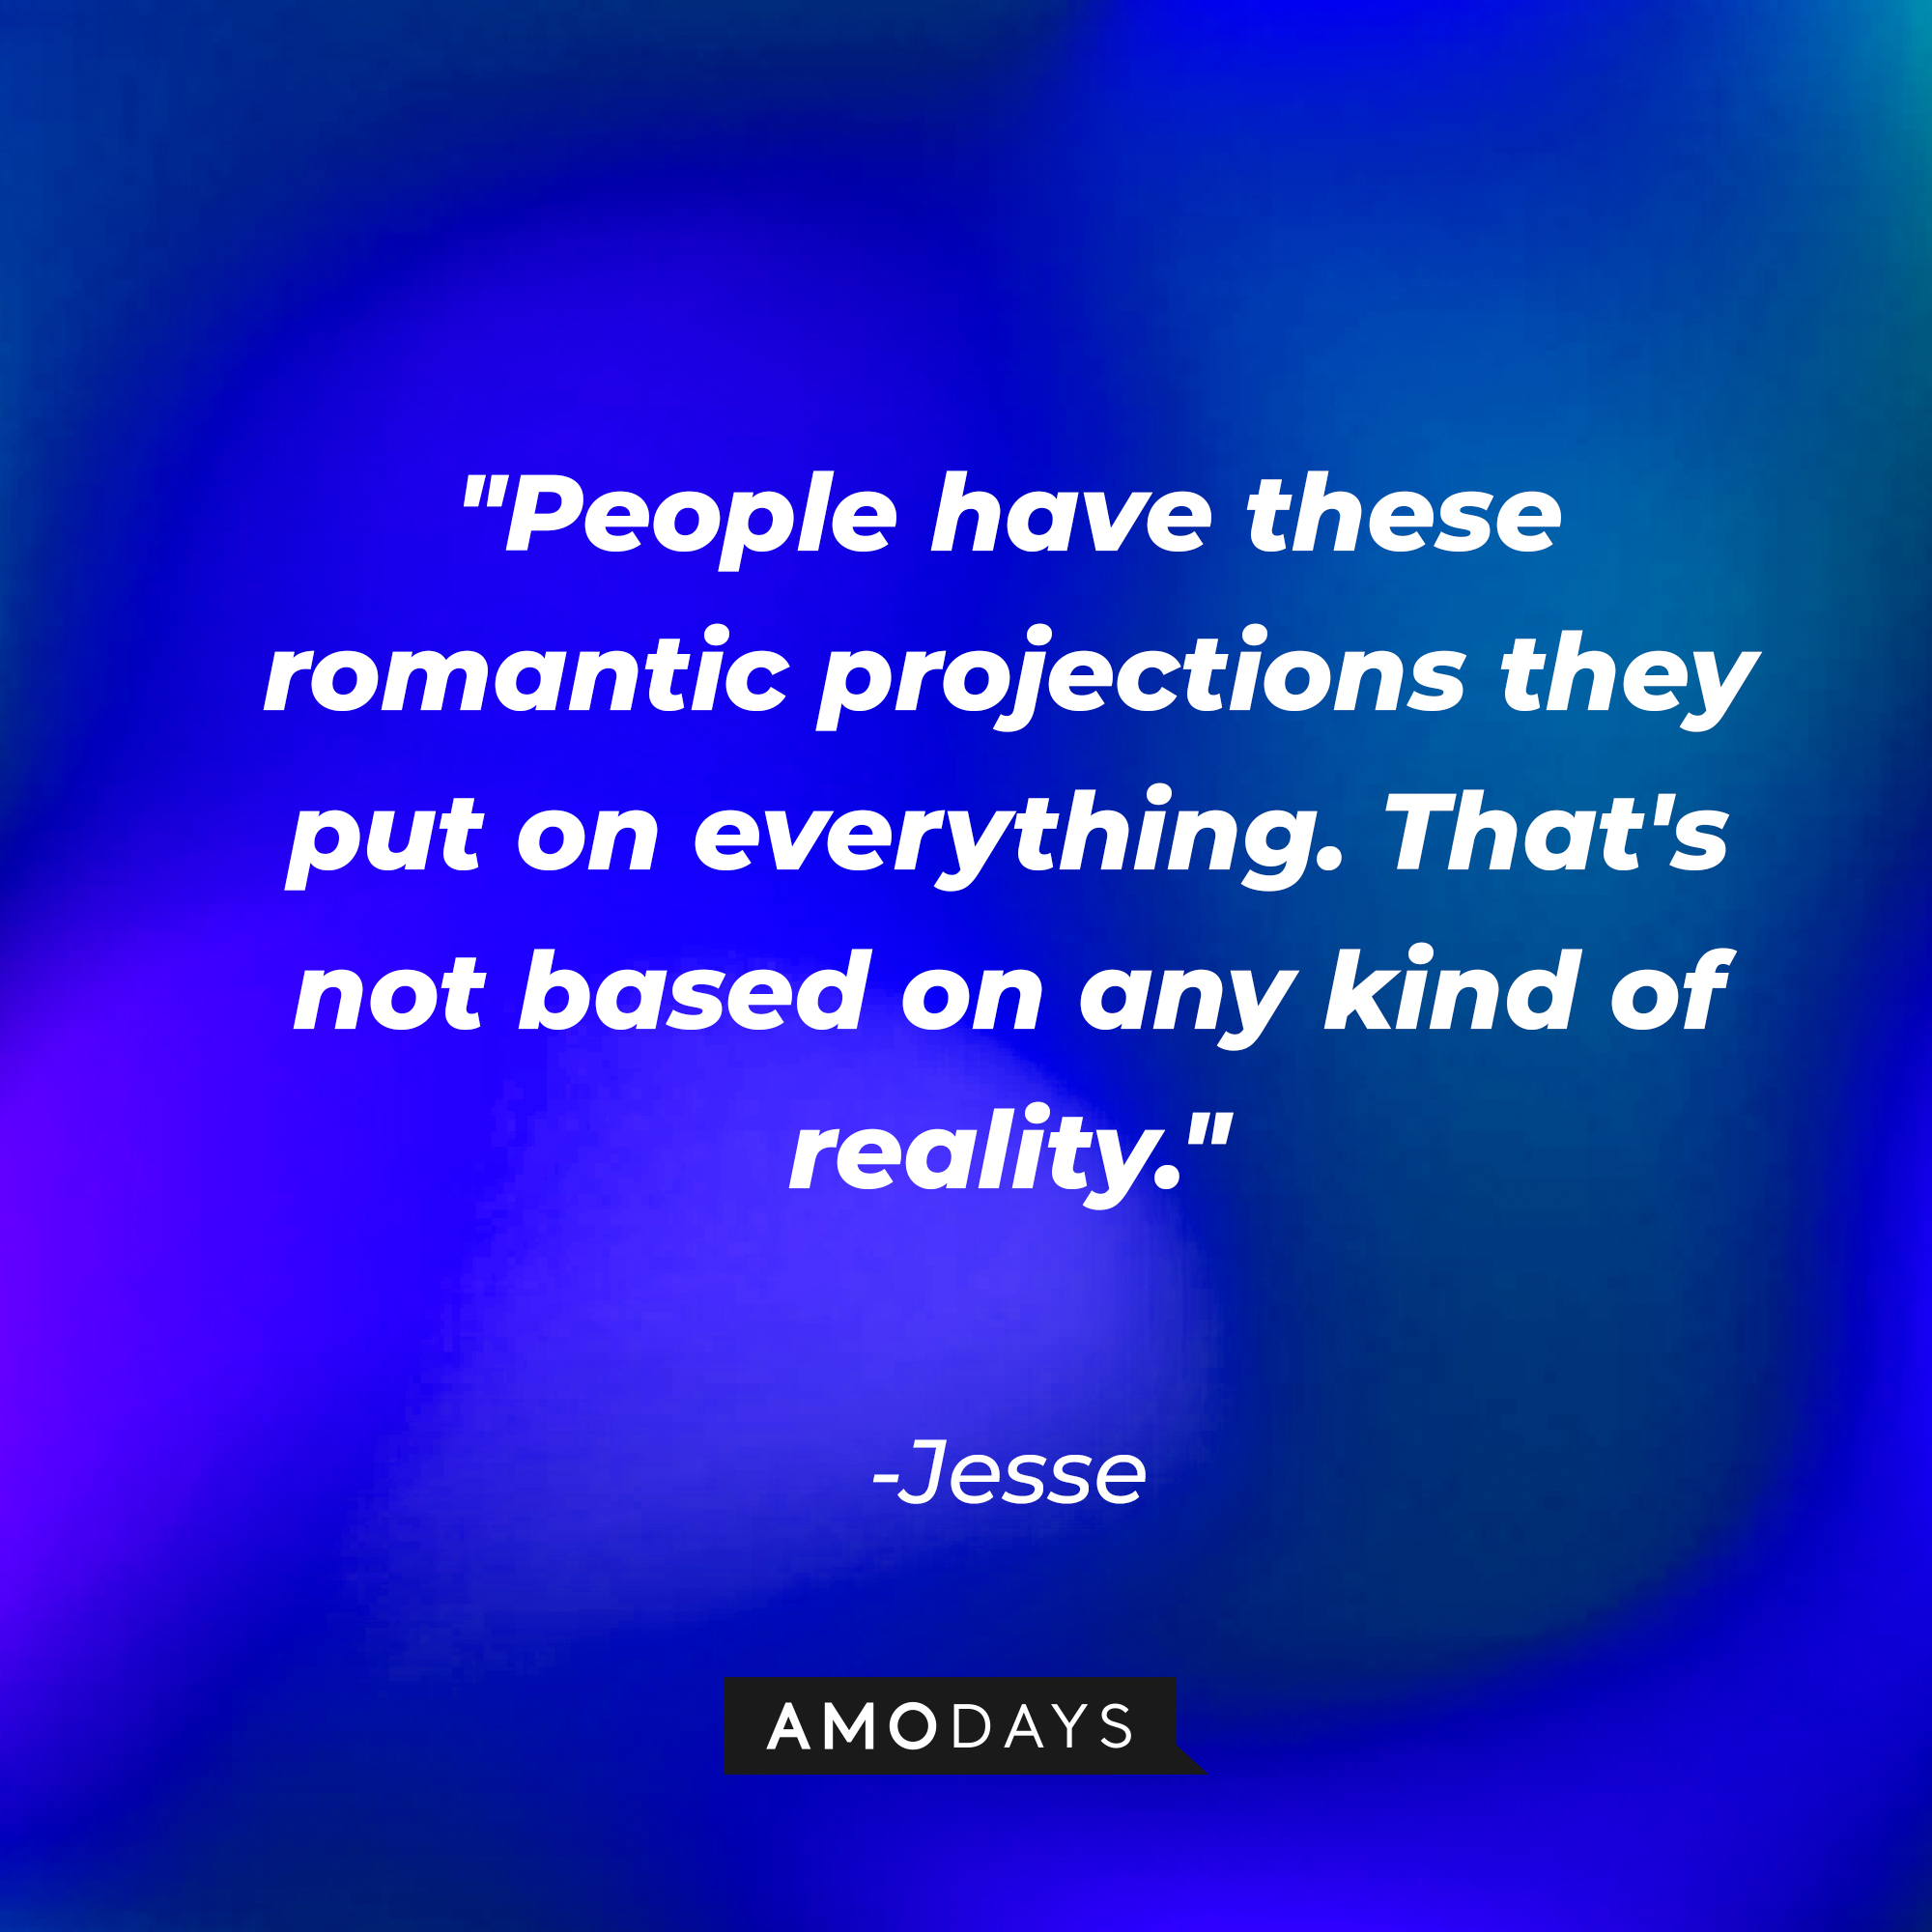 Jesse's quote: "People have these romantic projections they put on everything. That's not based on any kind of reality." | Source: AmoDays